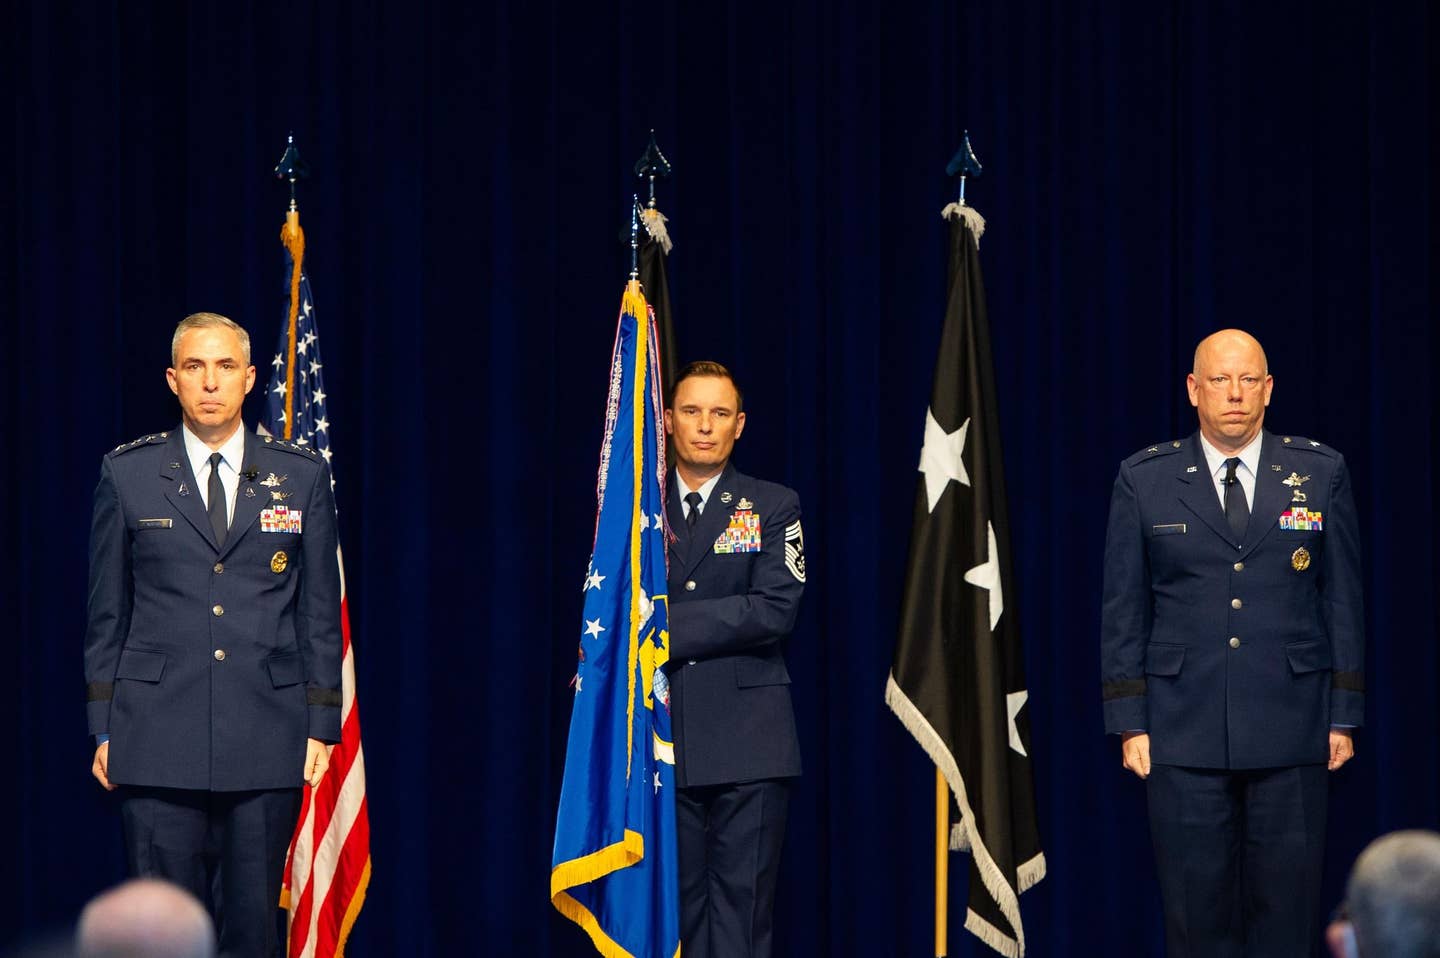 Brig. Gen. Stephen Purdy (R) assumed command of the 45th Space Wing in a ceremony held on January 5, 2021, at Patrick Space Force Base, Florida.<em> U.S. Space Force</em>